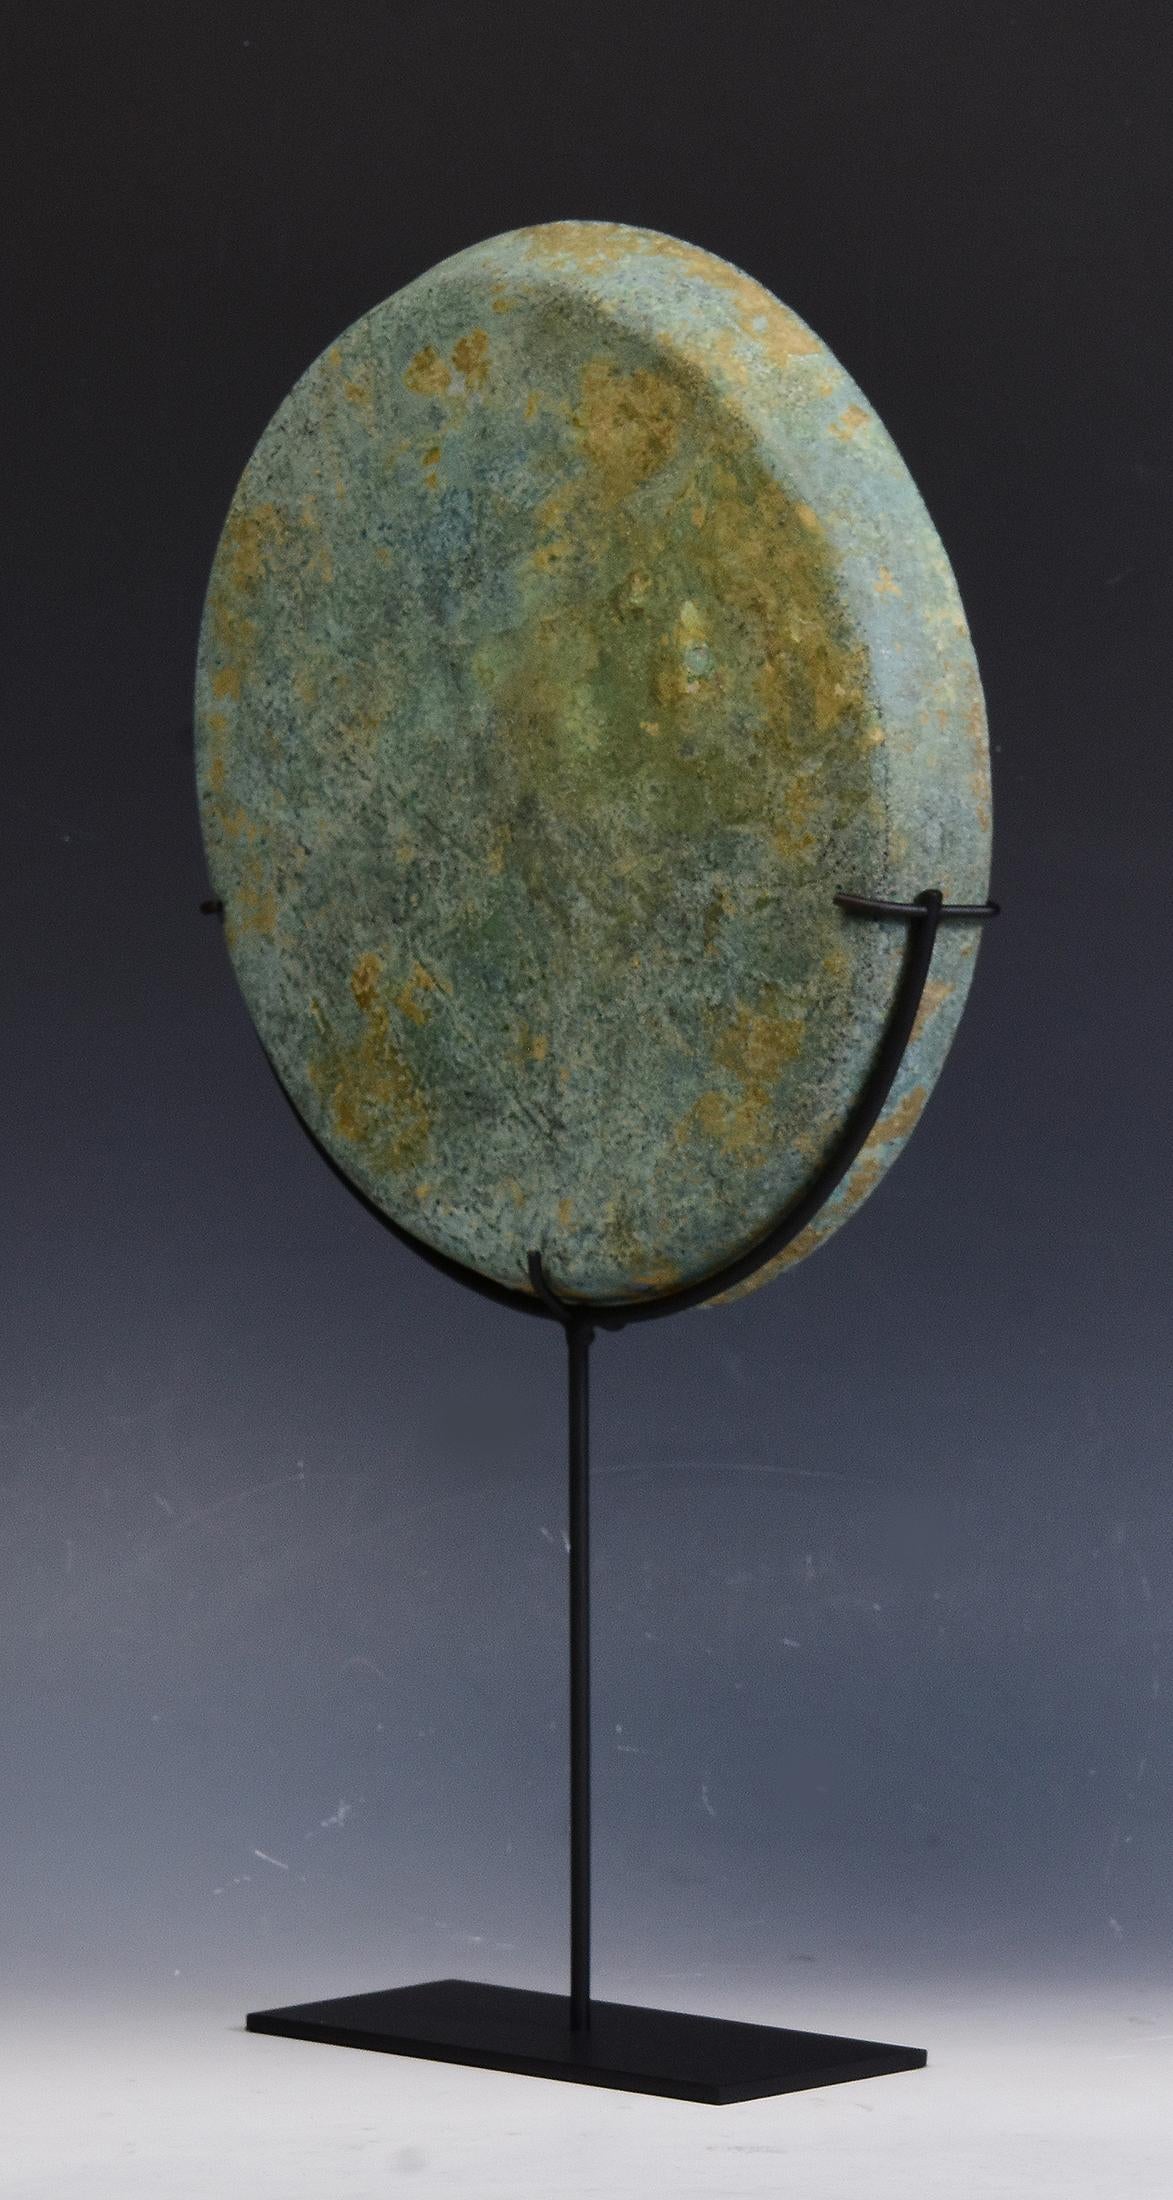 Metalwork 12th Century, Angkor Vat, Antique Khmer Bronze Gong with Stand